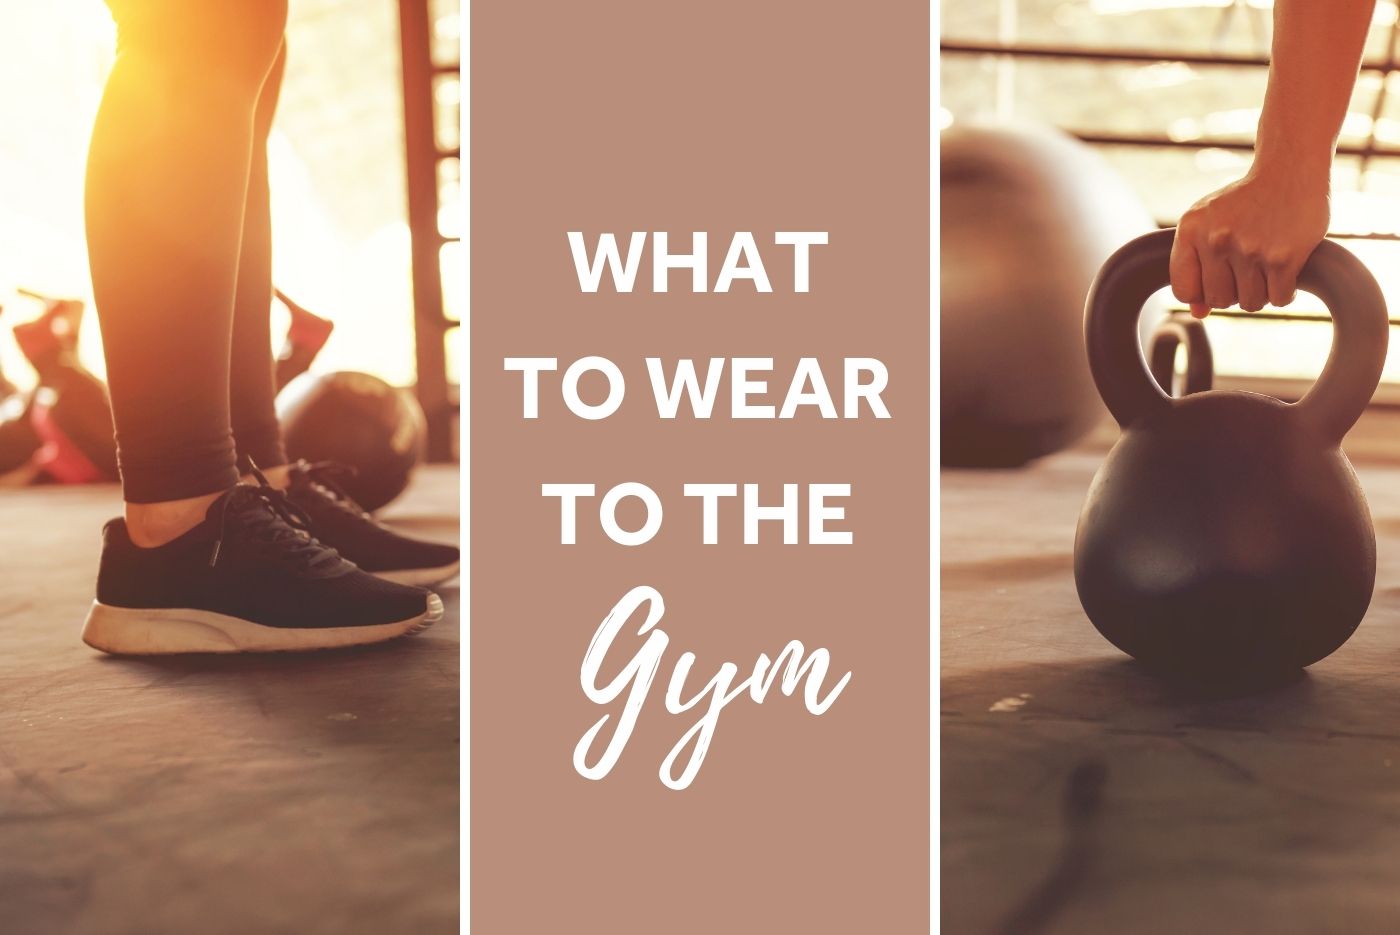 WHAT TO WEAR TO THE GYM